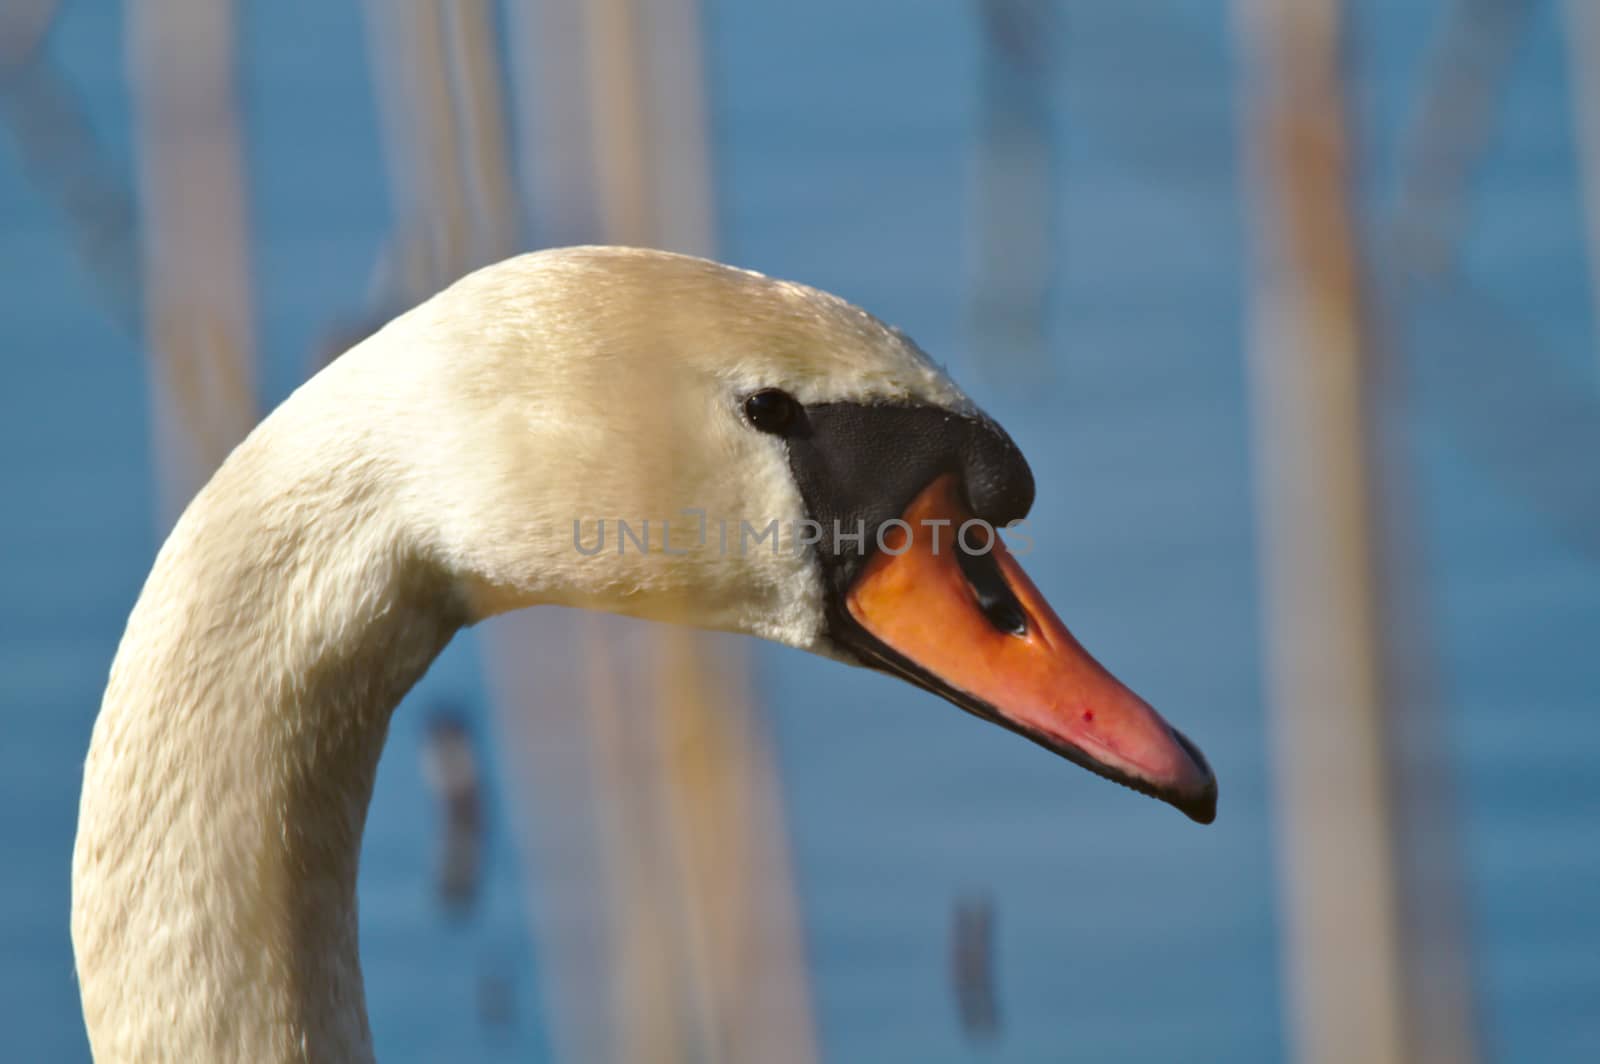 Closeup photo of white swan. Swan portrait with blue background.